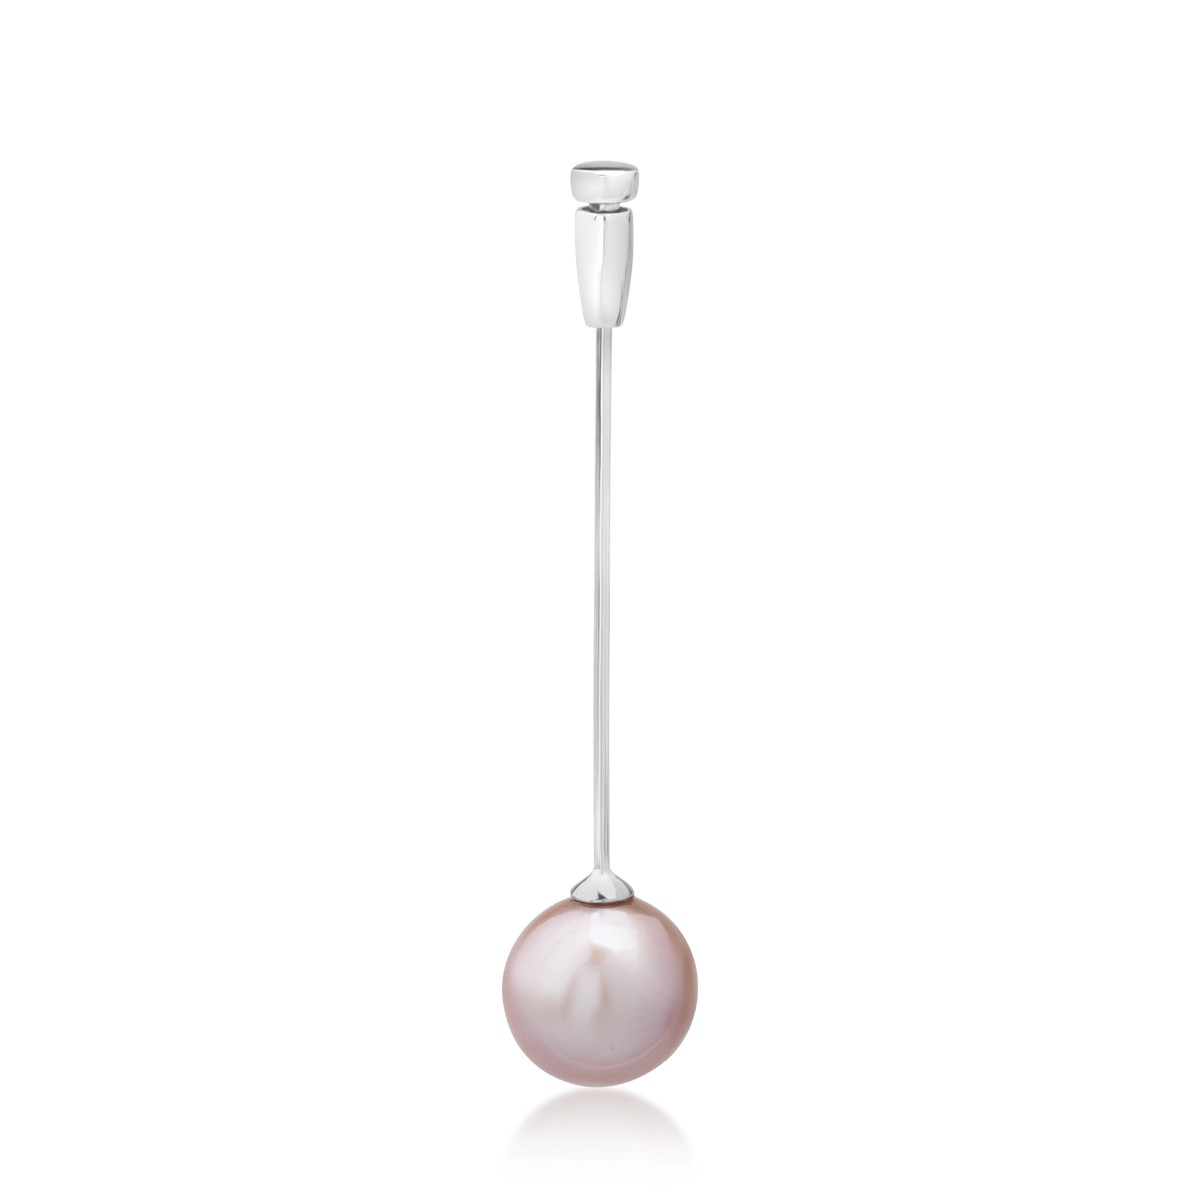 18K white gold brooch with 11.48ct cultured pearl